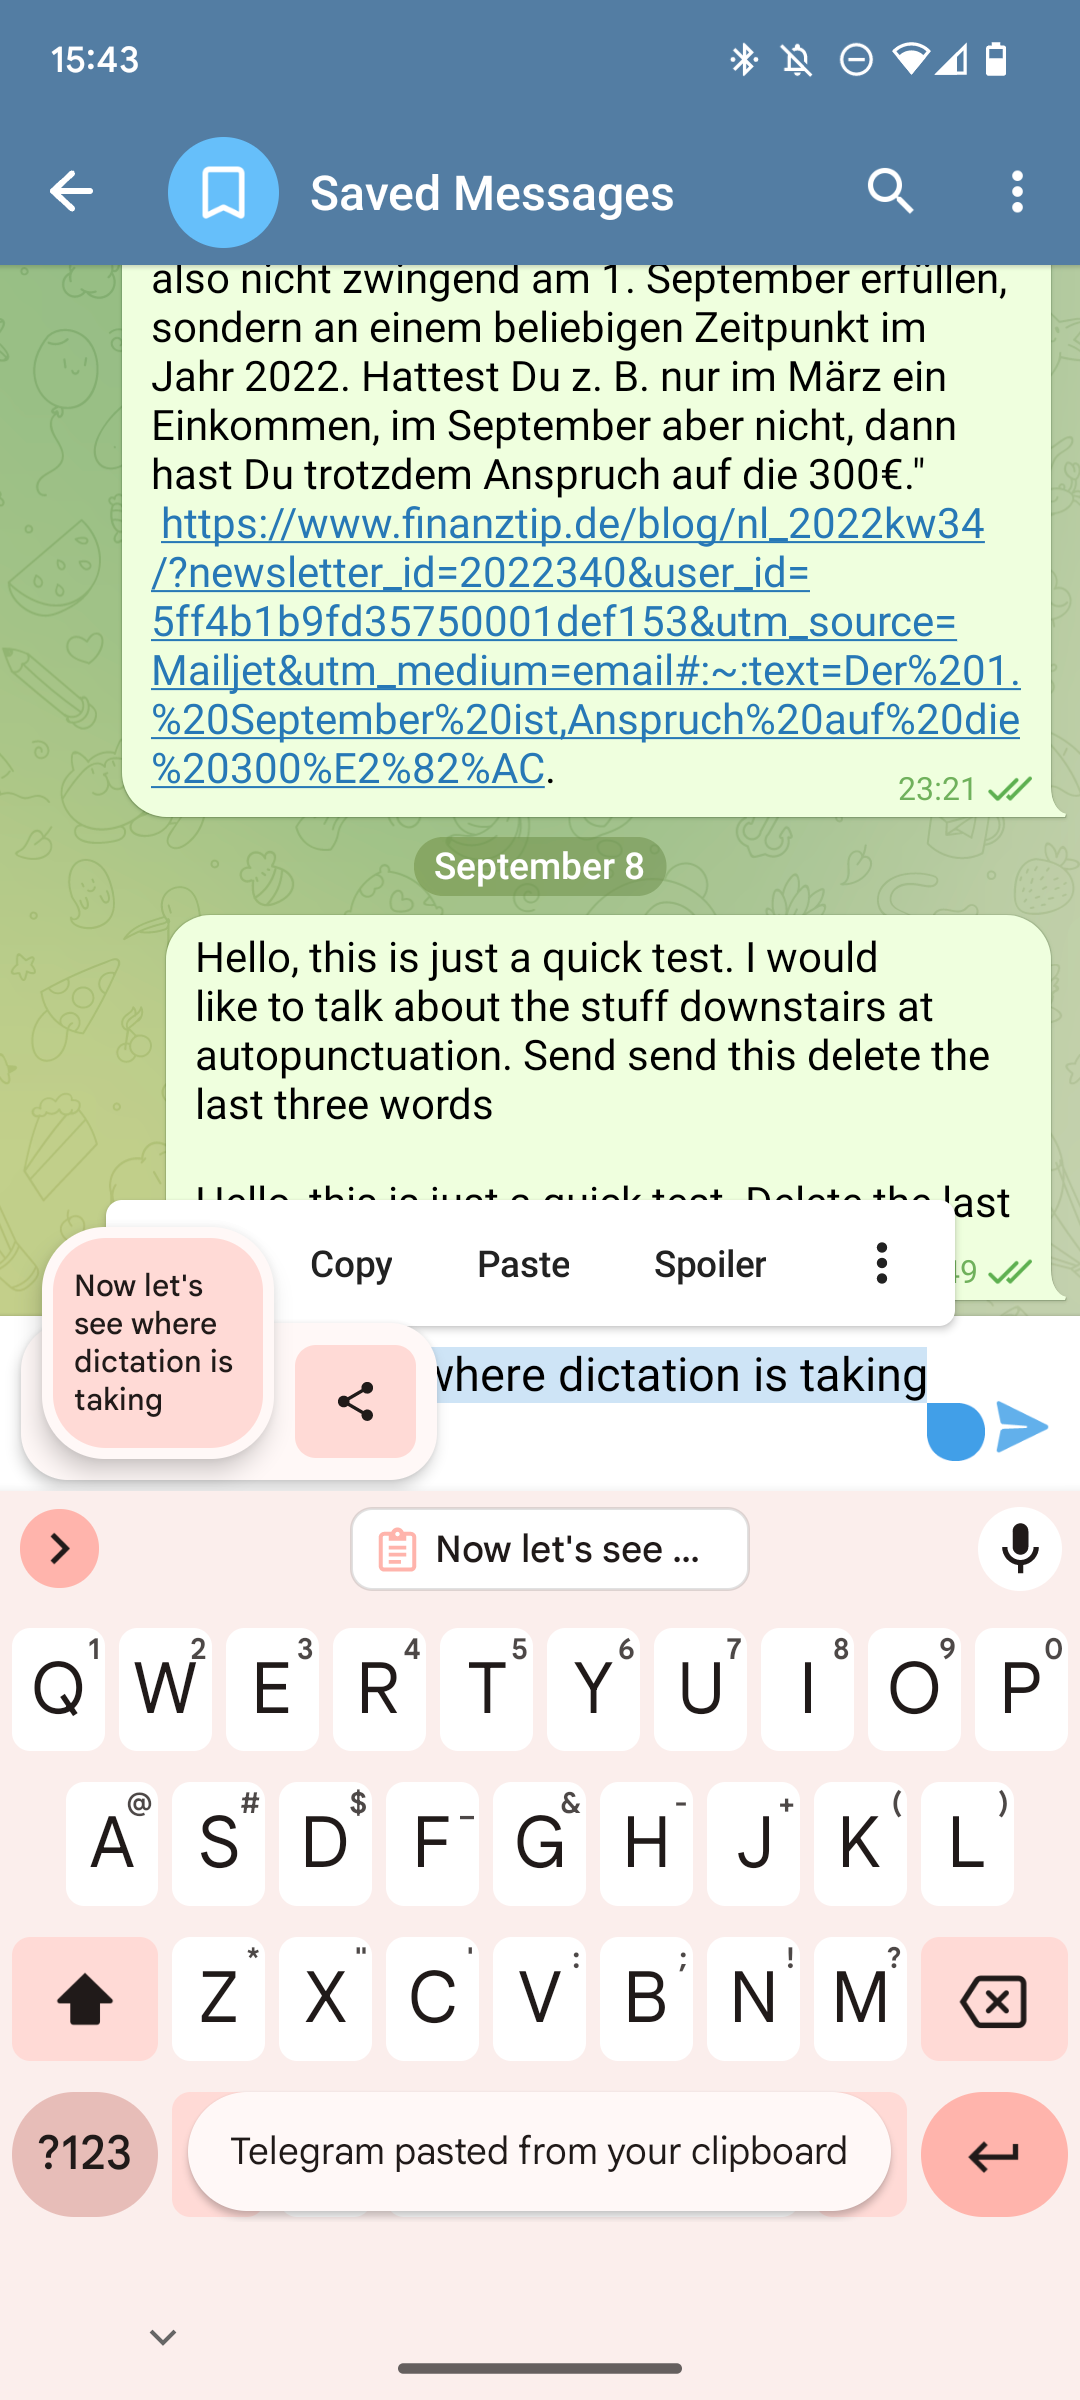 Android 13's clipboard popup that shows up in the bottom left after copying a text